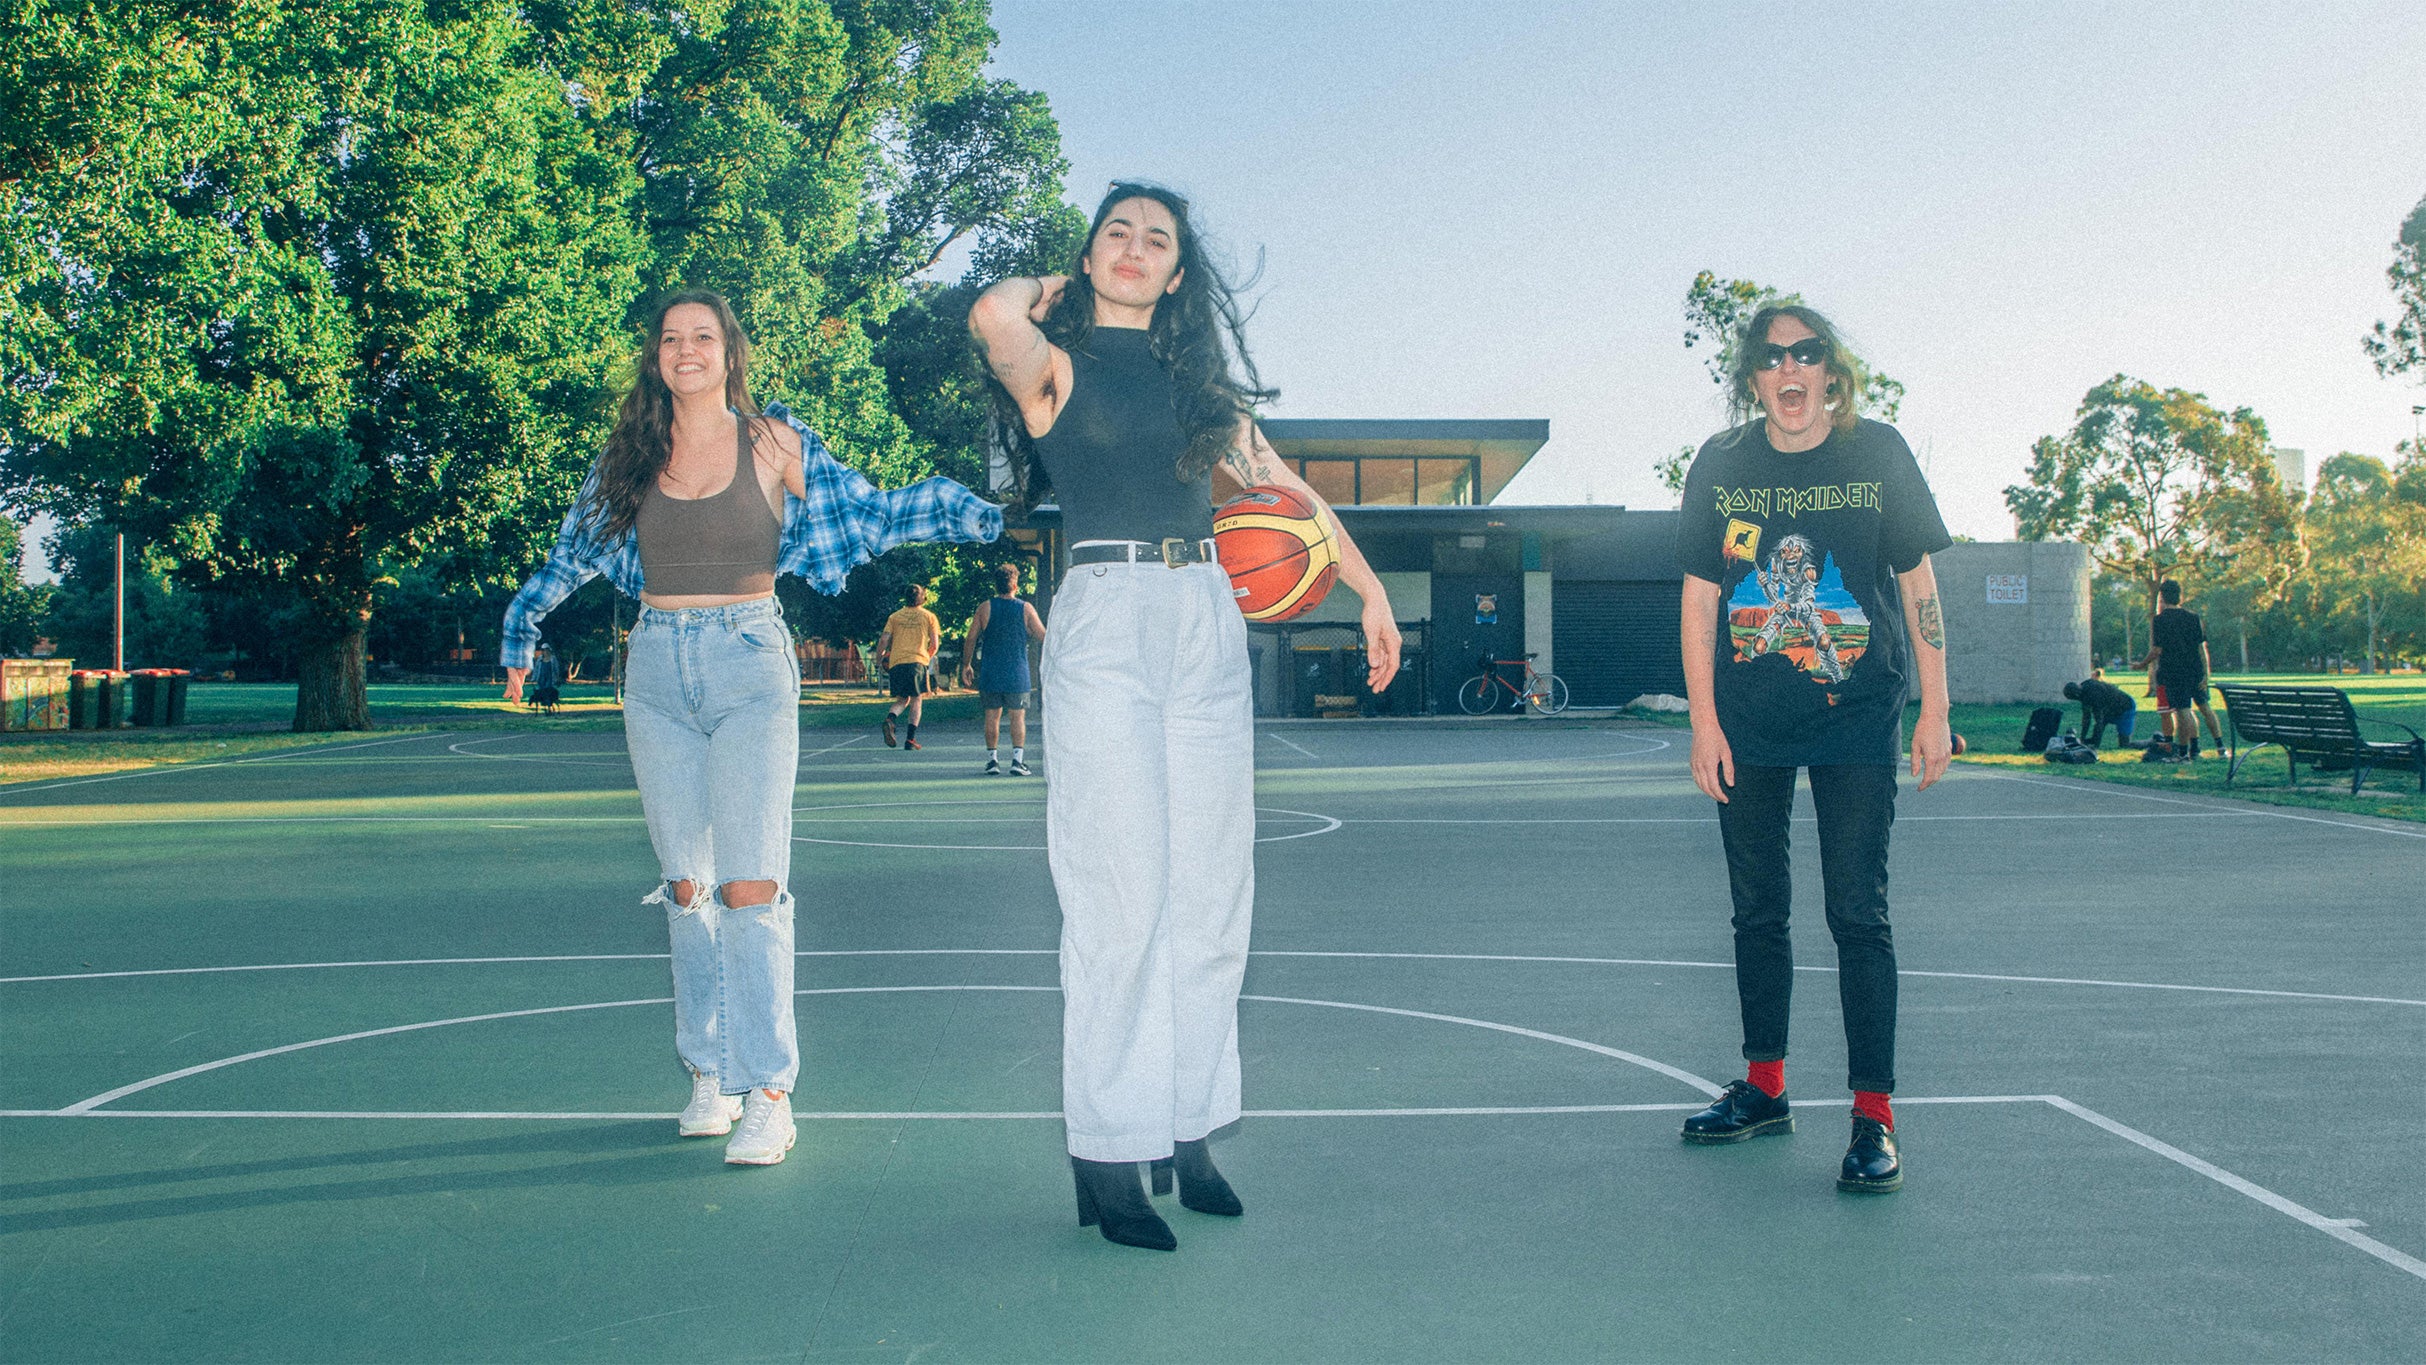 Camp Cope in New York promo photo for Seated presale offer code